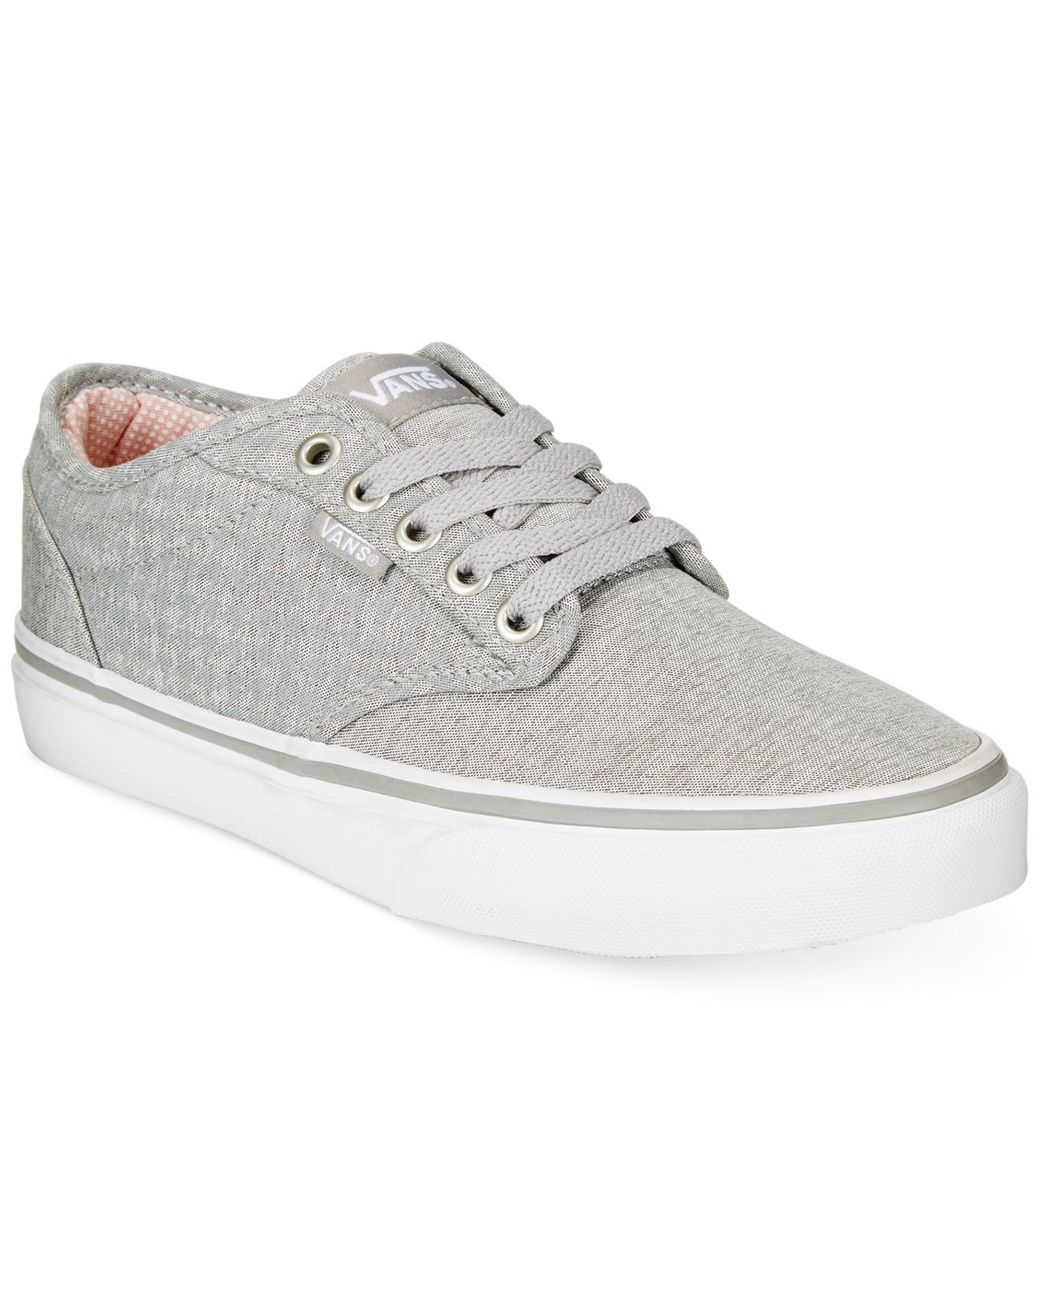 Vans Women's Atwood Lace-up Sneakers in Gray | Lyst